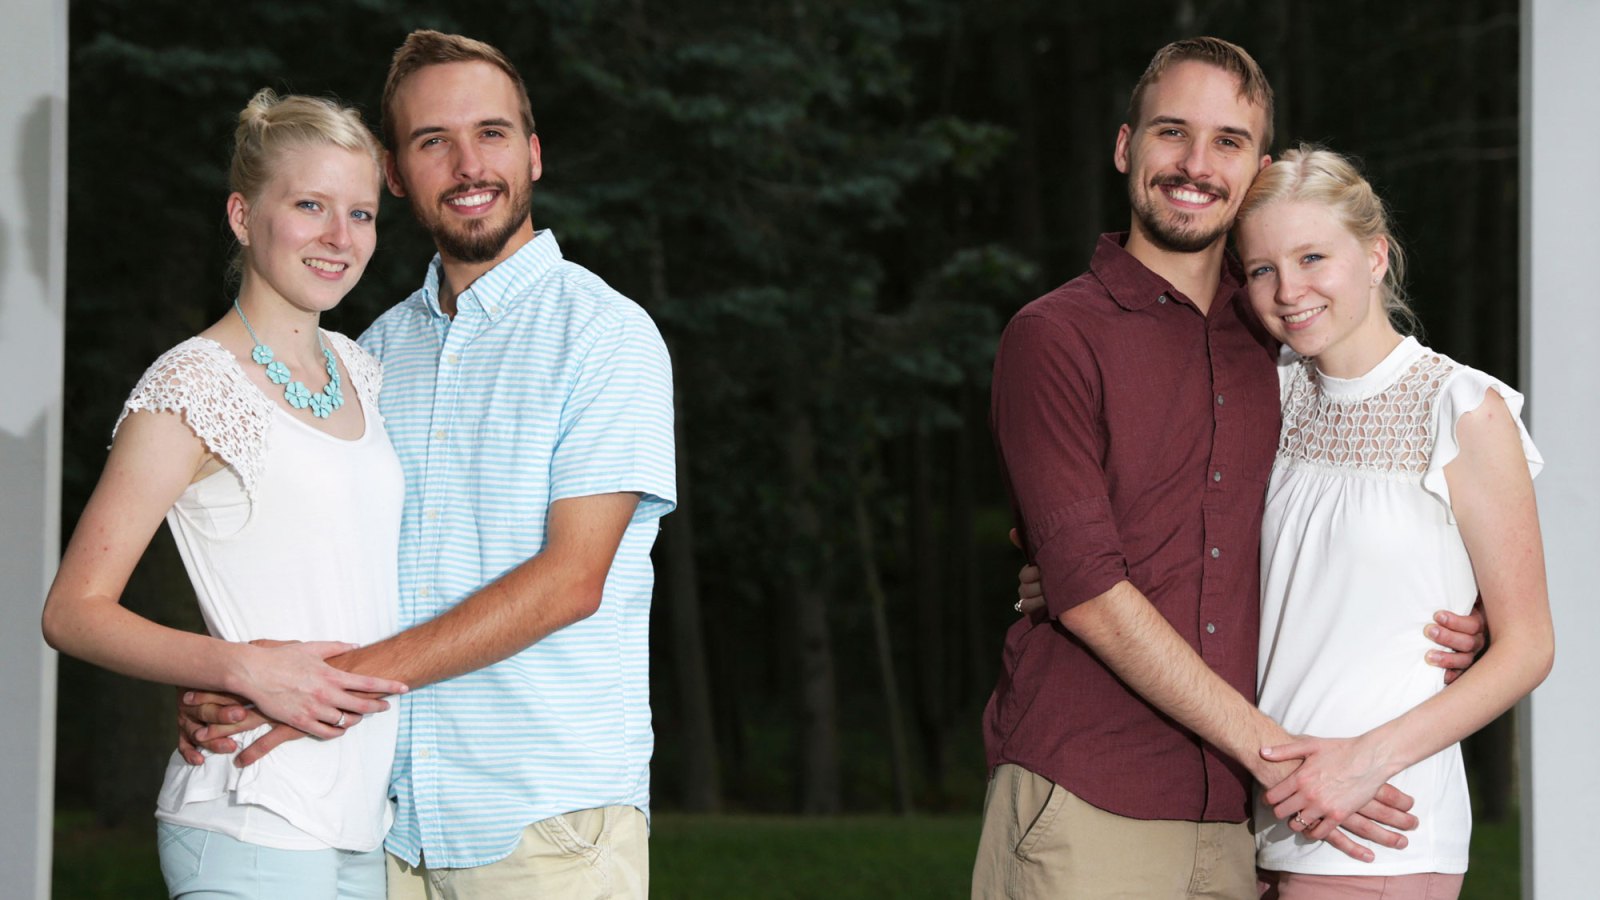 identical twin brothers identical twin sisters marry marriage